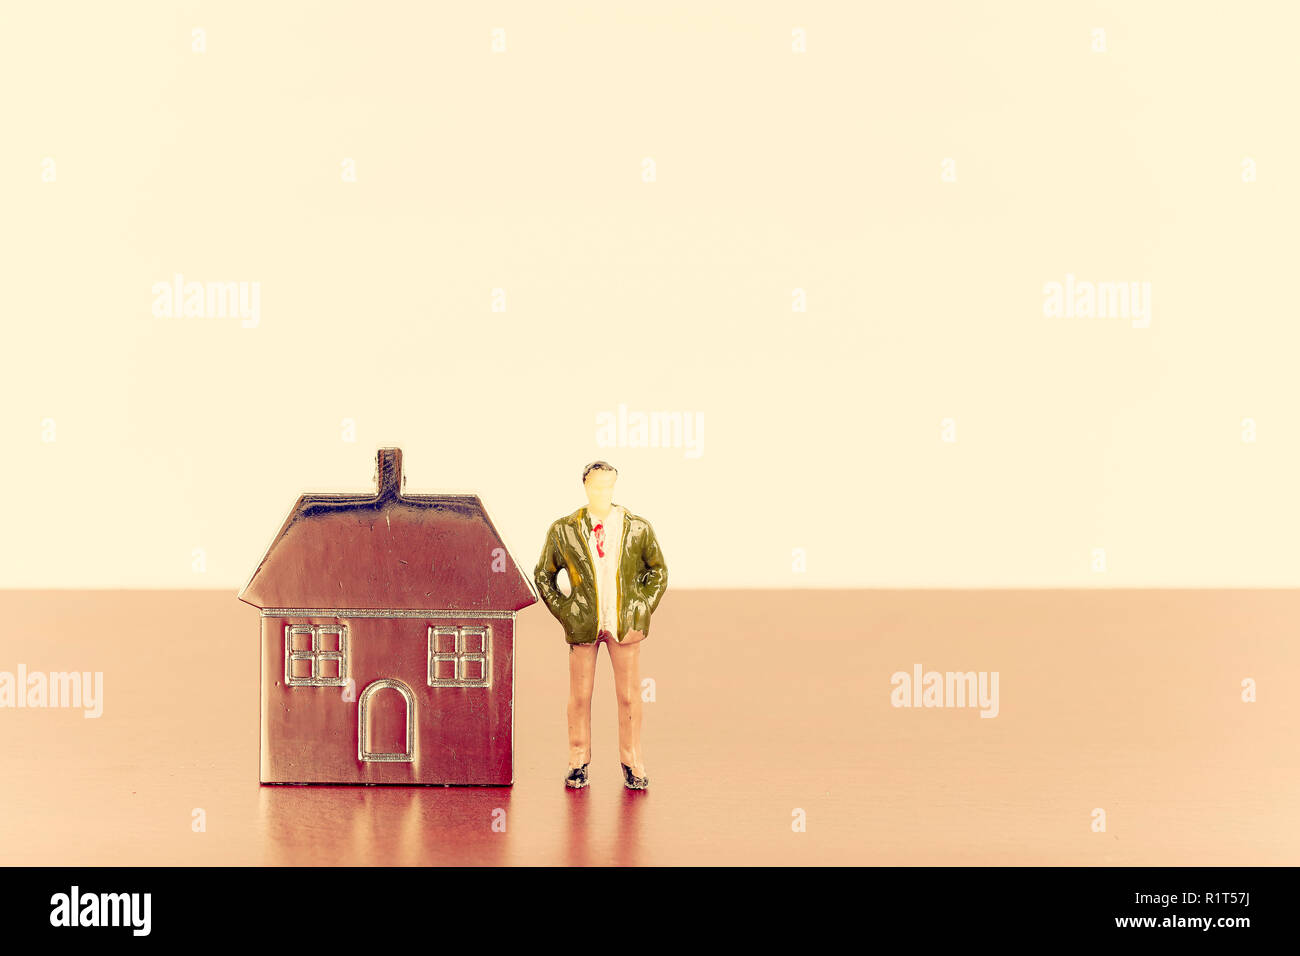 Miniature figure and metal house replica for property investment concept Stock Photo